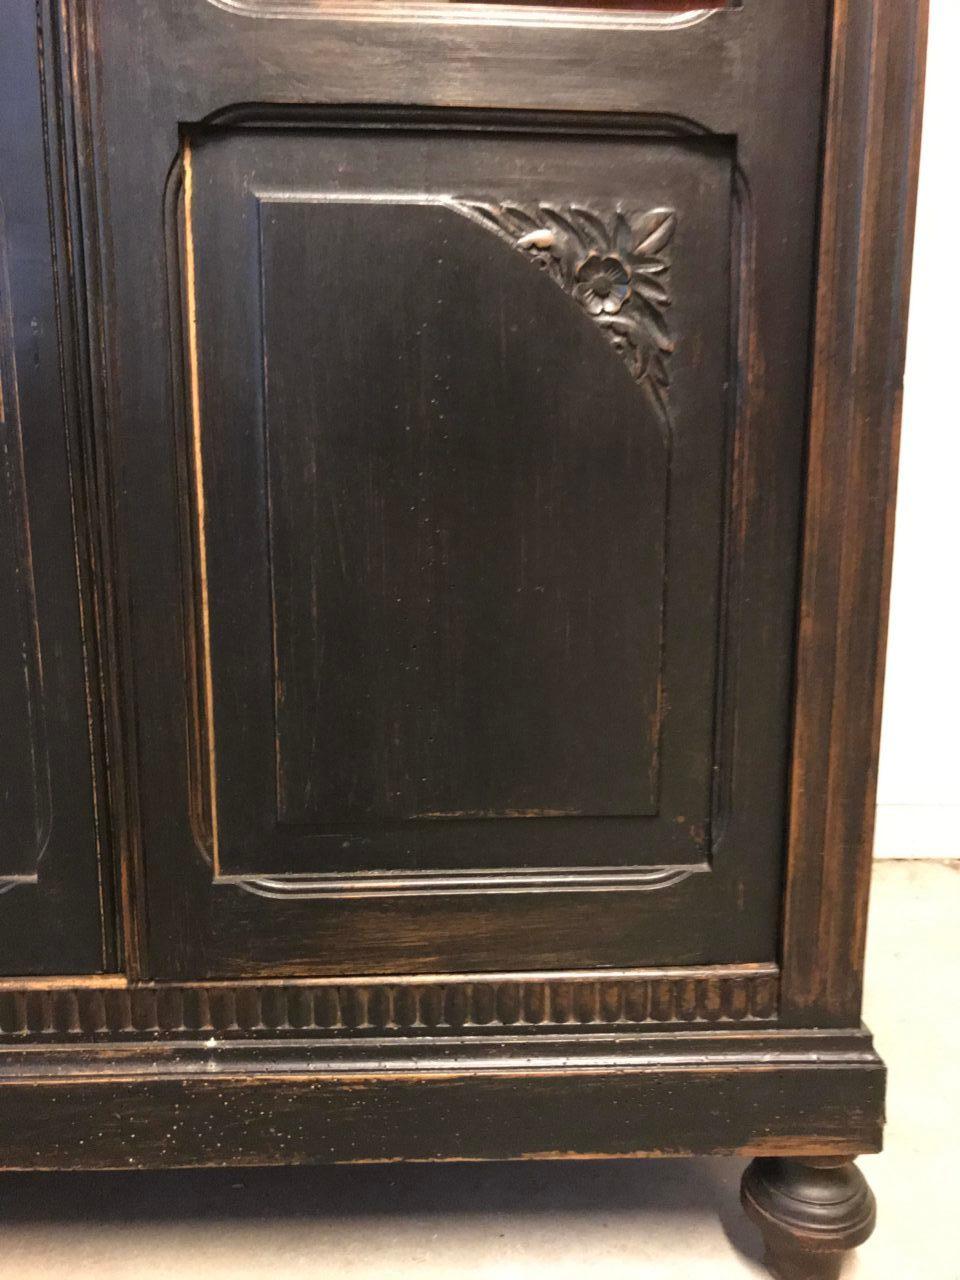 Charming and fine little French cabinet, with a super profile and detailed work. Consists of two cupboard doors with original glass. 3 practical shelves, and door locks.